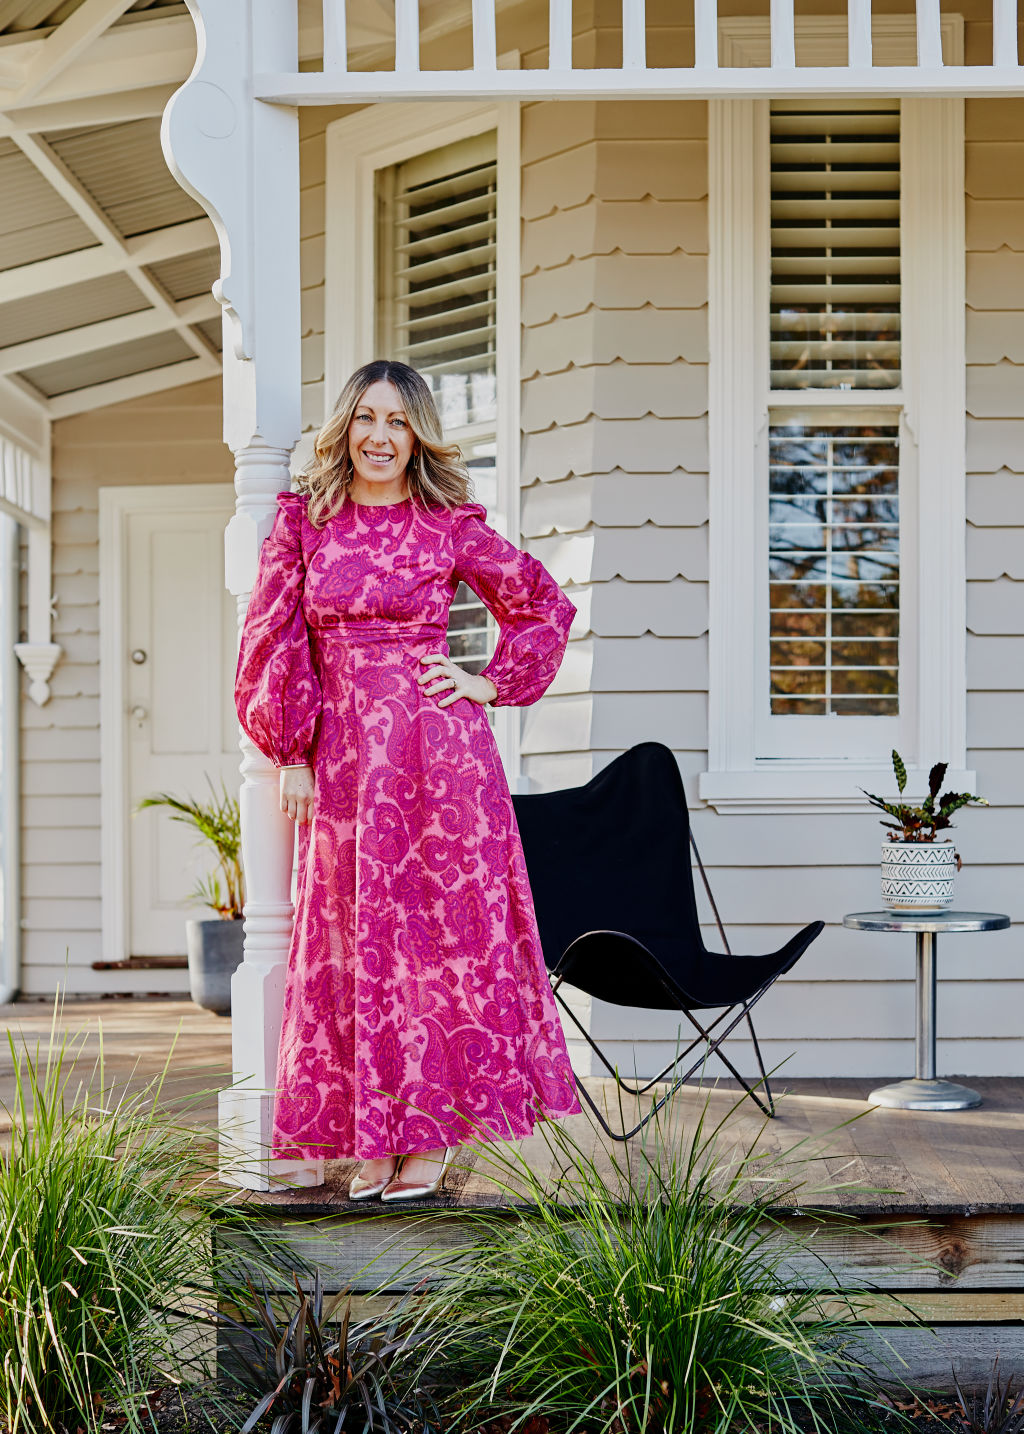 Her skill at finding rare collectables started when she was a teenager, going to op-shops with her late mother Janice. Photo: Amelia Stanwix Photography